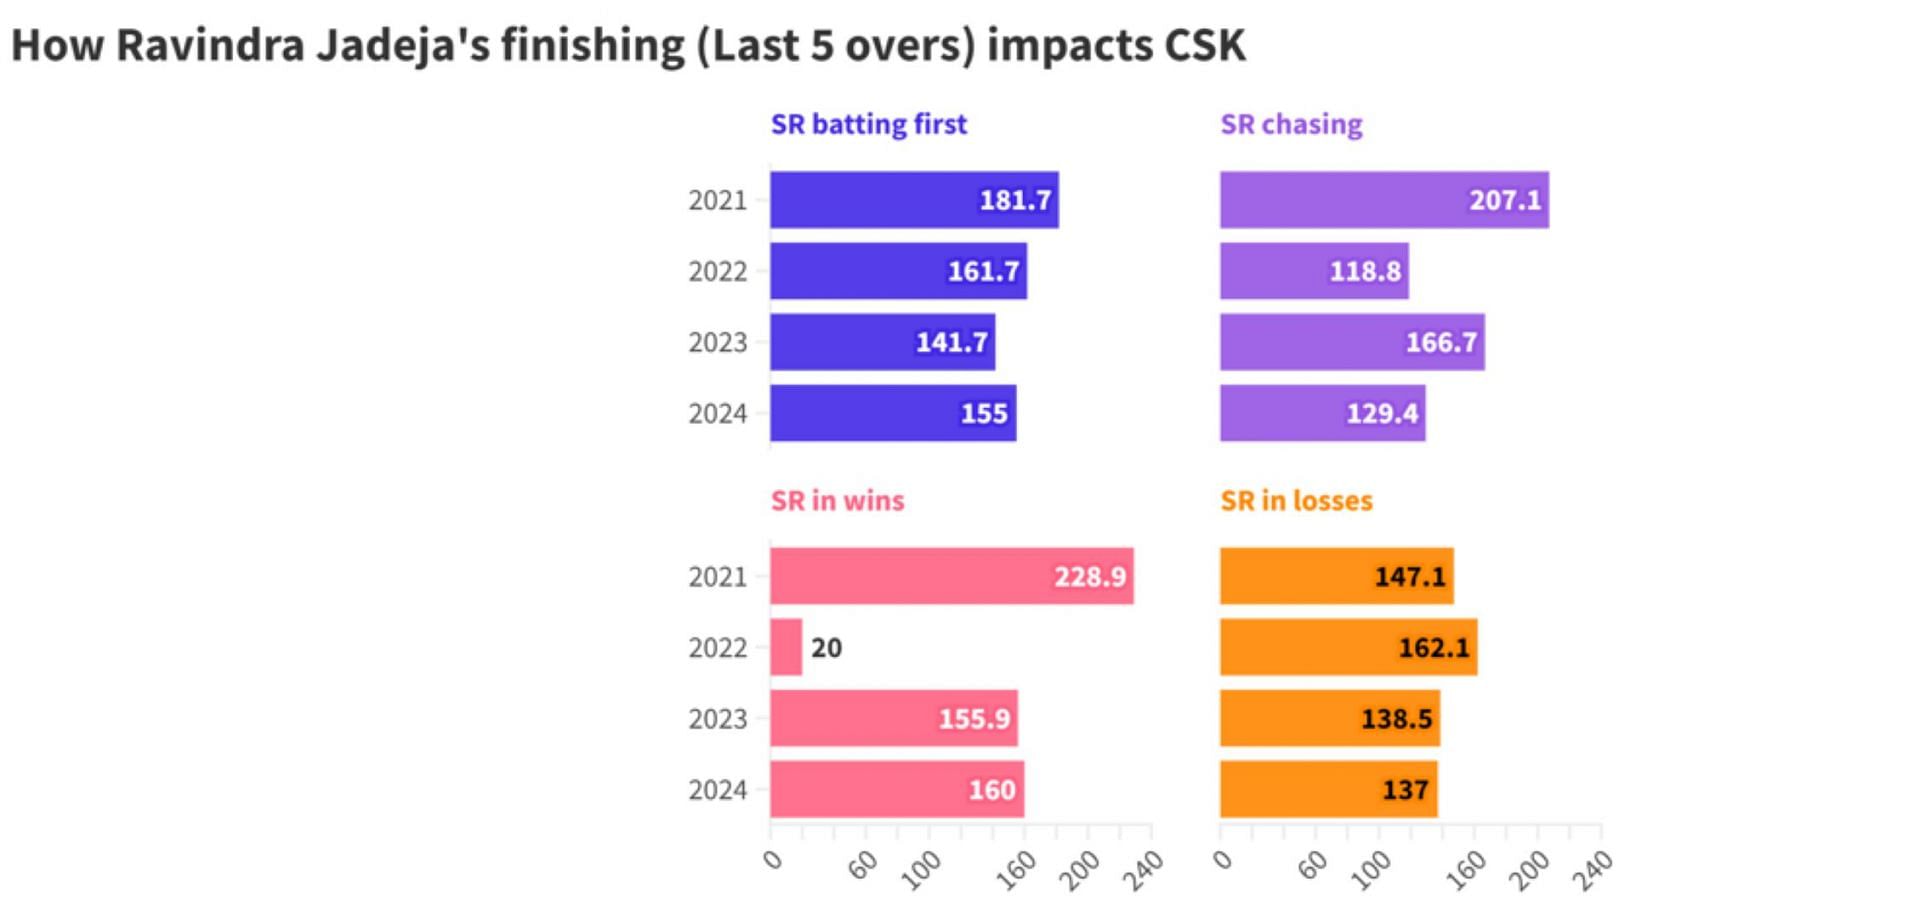 Jadeja&#039;s finishing form has directly impacted CSK&#039;s fortunes over the years. (Credit: Cricinfo Cricmetric)